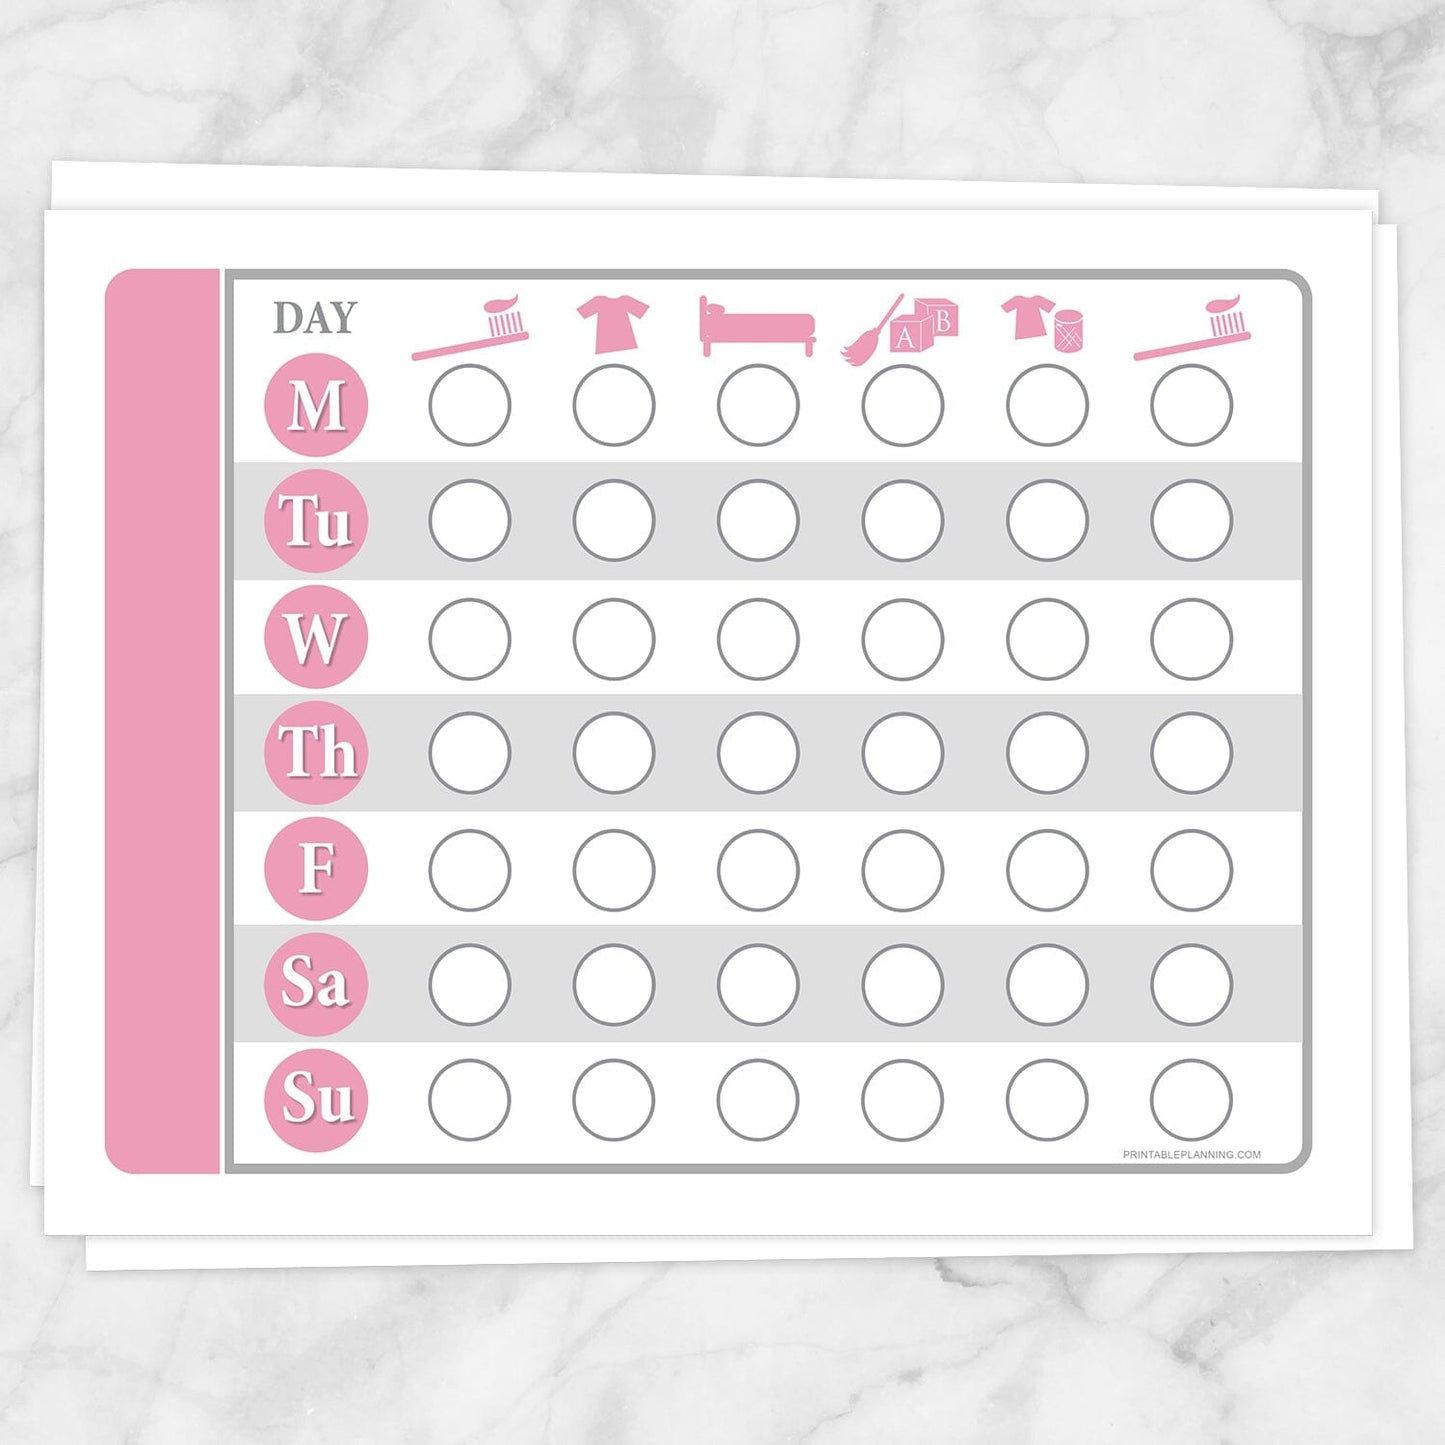 Printable Toddler Chore Chart in Pink Daily Routine Weekly Pages at Printable Planning.